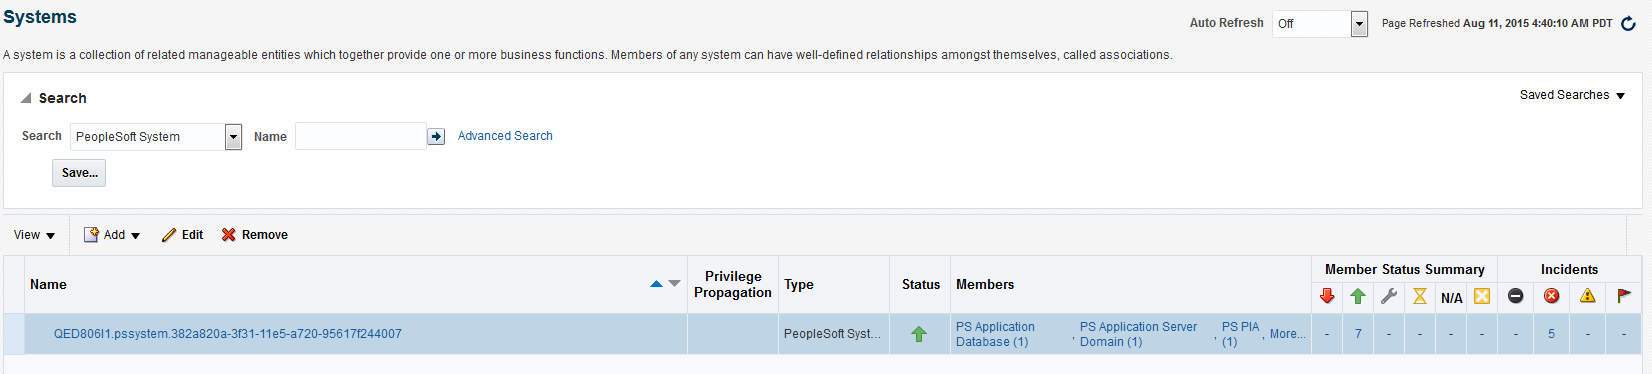 PeopleSoft System Members page